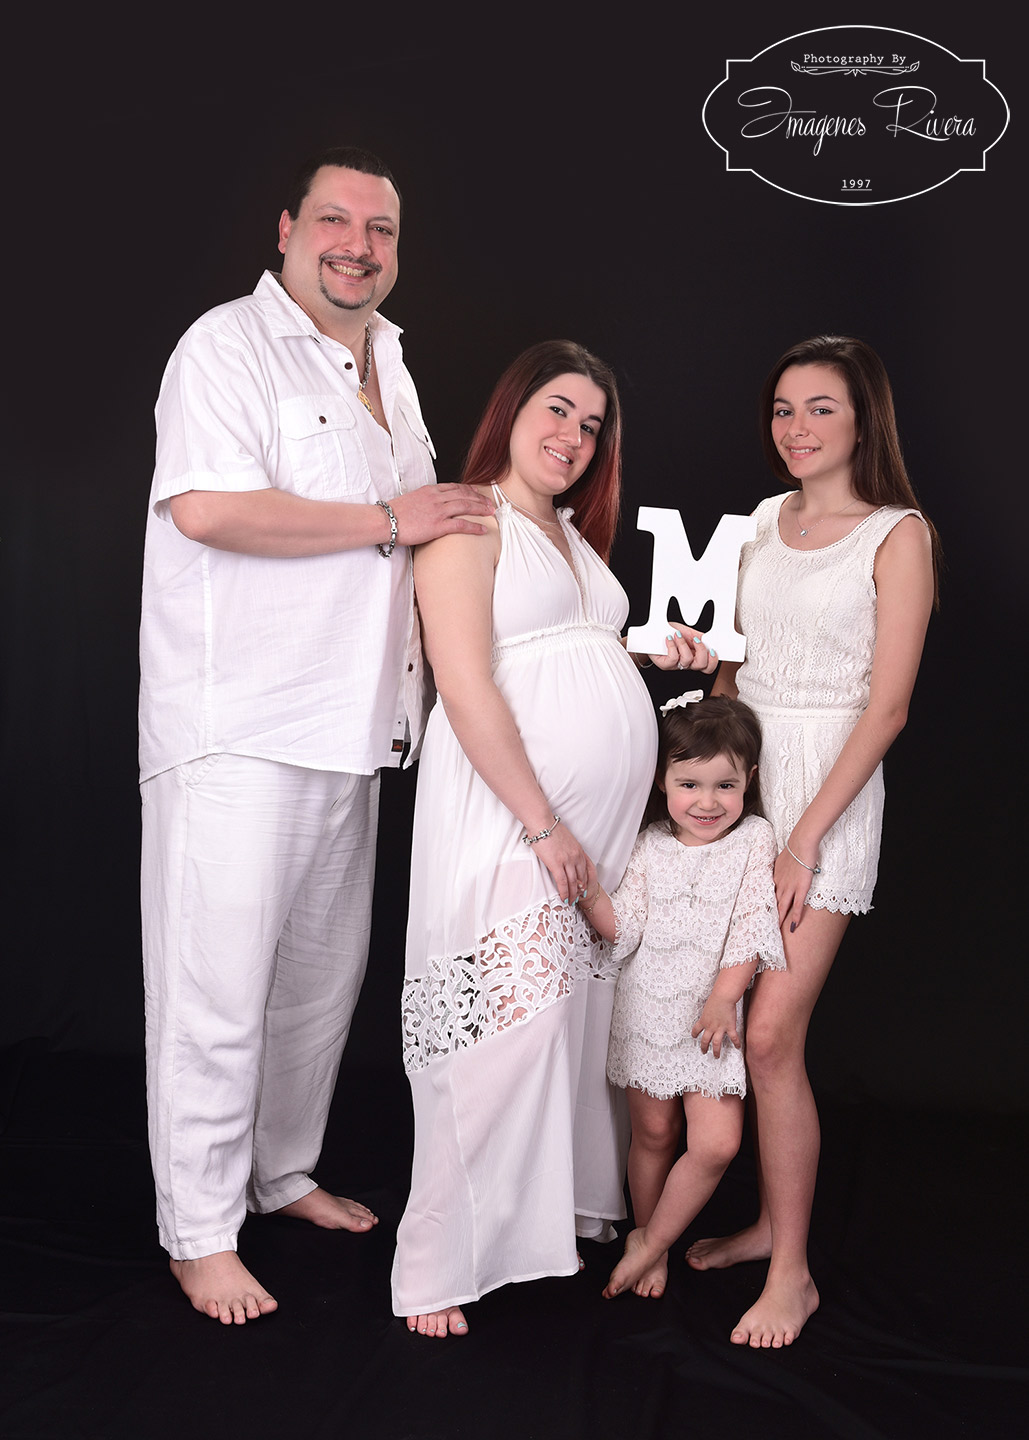 ♥ Maternity and family pictures in a Miami studio | Imagenes Rivera Maternity photographer ♥